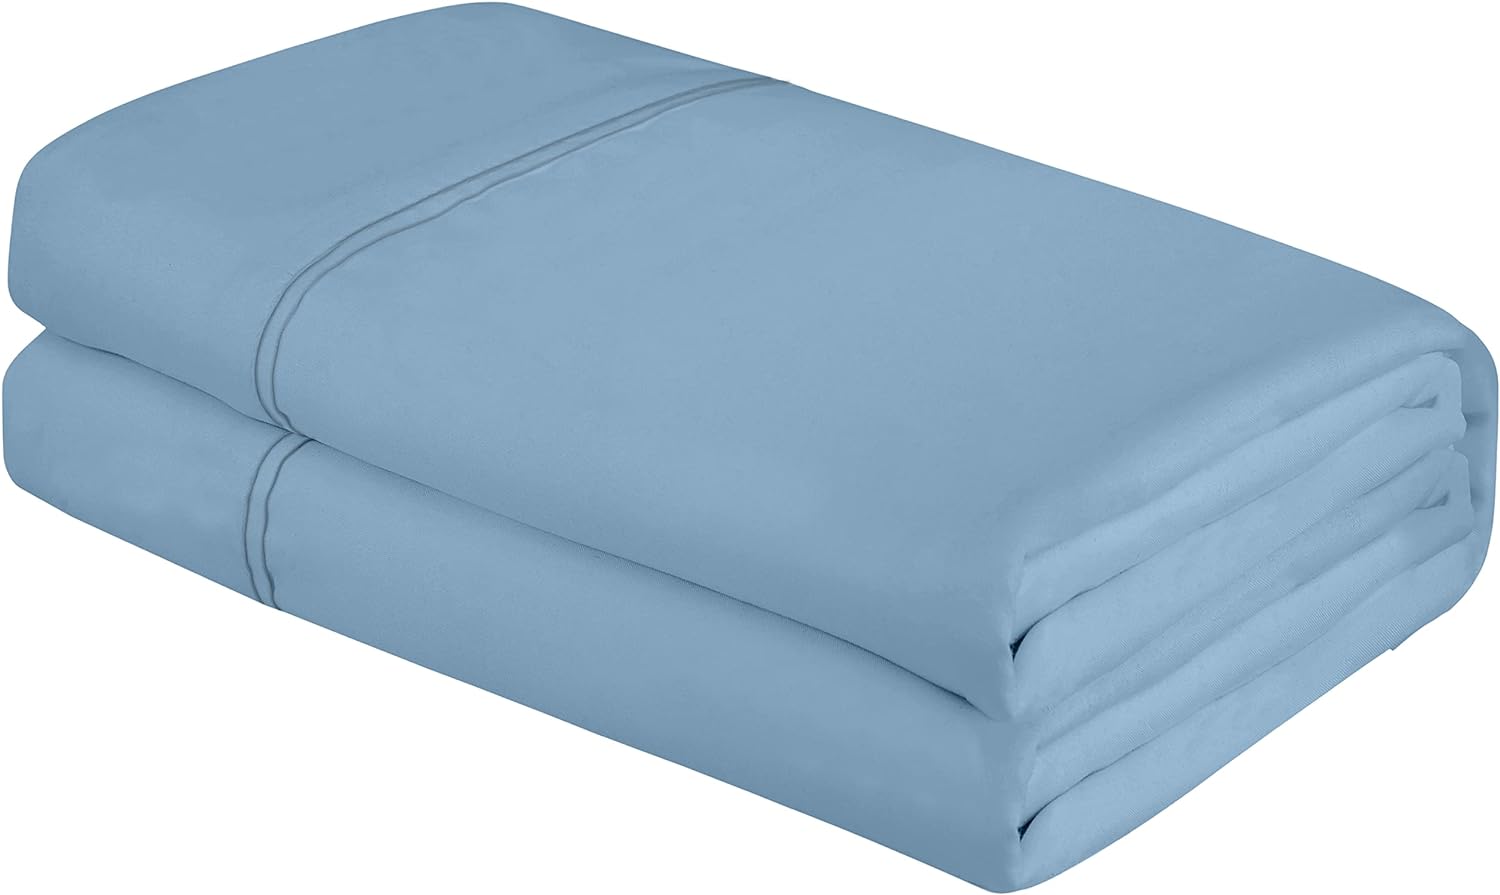 Royale Linens Twin Size Flat Sheet Only - Brushed 1800 Microfiber - Ultra Soft & Breathable - Wrinkle & Stain Resistant - Hotel Quality Flat Sheet Sold Separately - Top Sheet For Bed (Twin, Lake Blue)